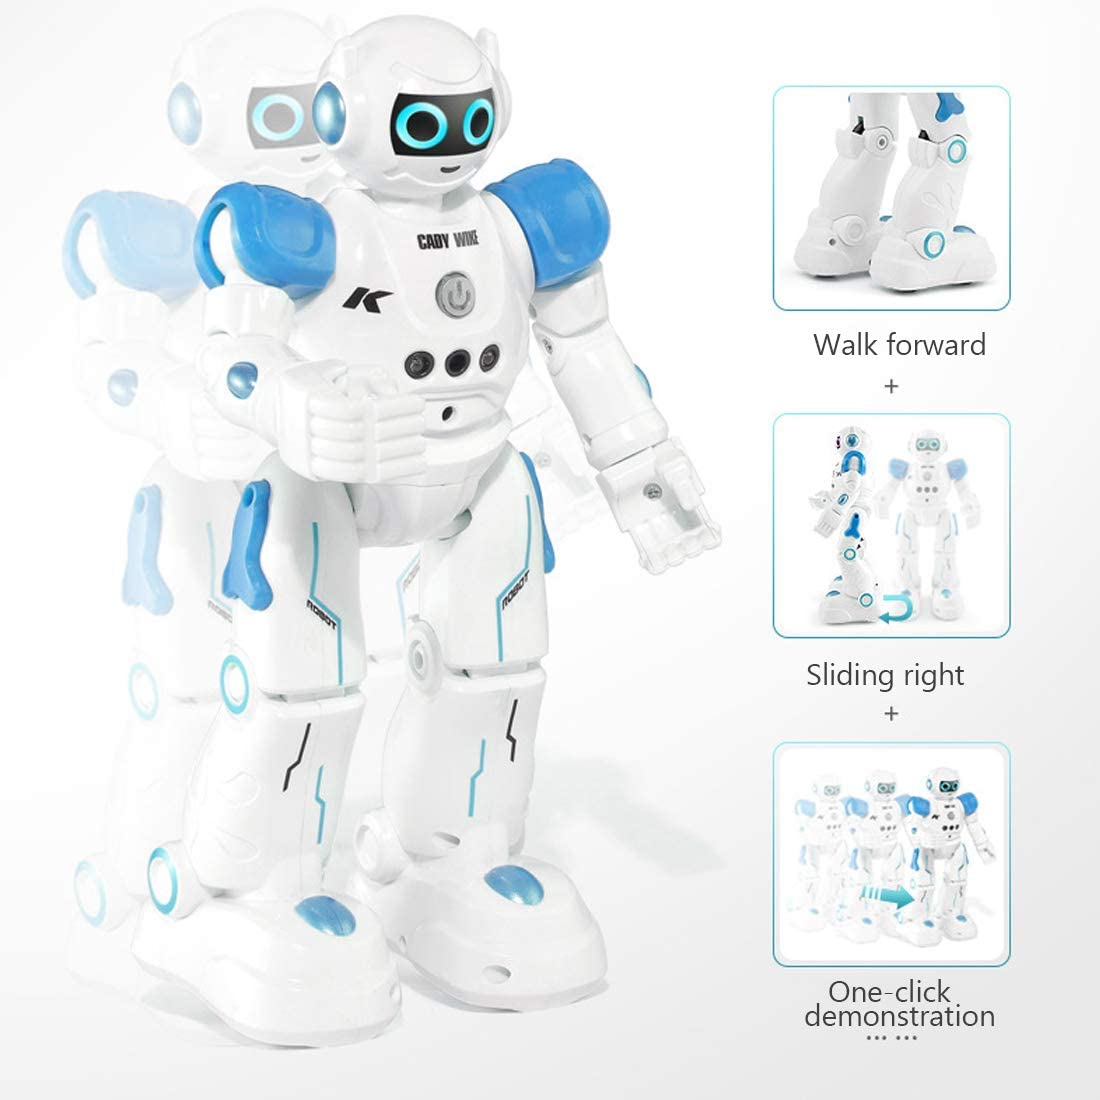 RC Robot for Kids,Intelligent Programmable Infrared Remote Control and Gesture Sensing Robots with Music Lights, Walking,Singing